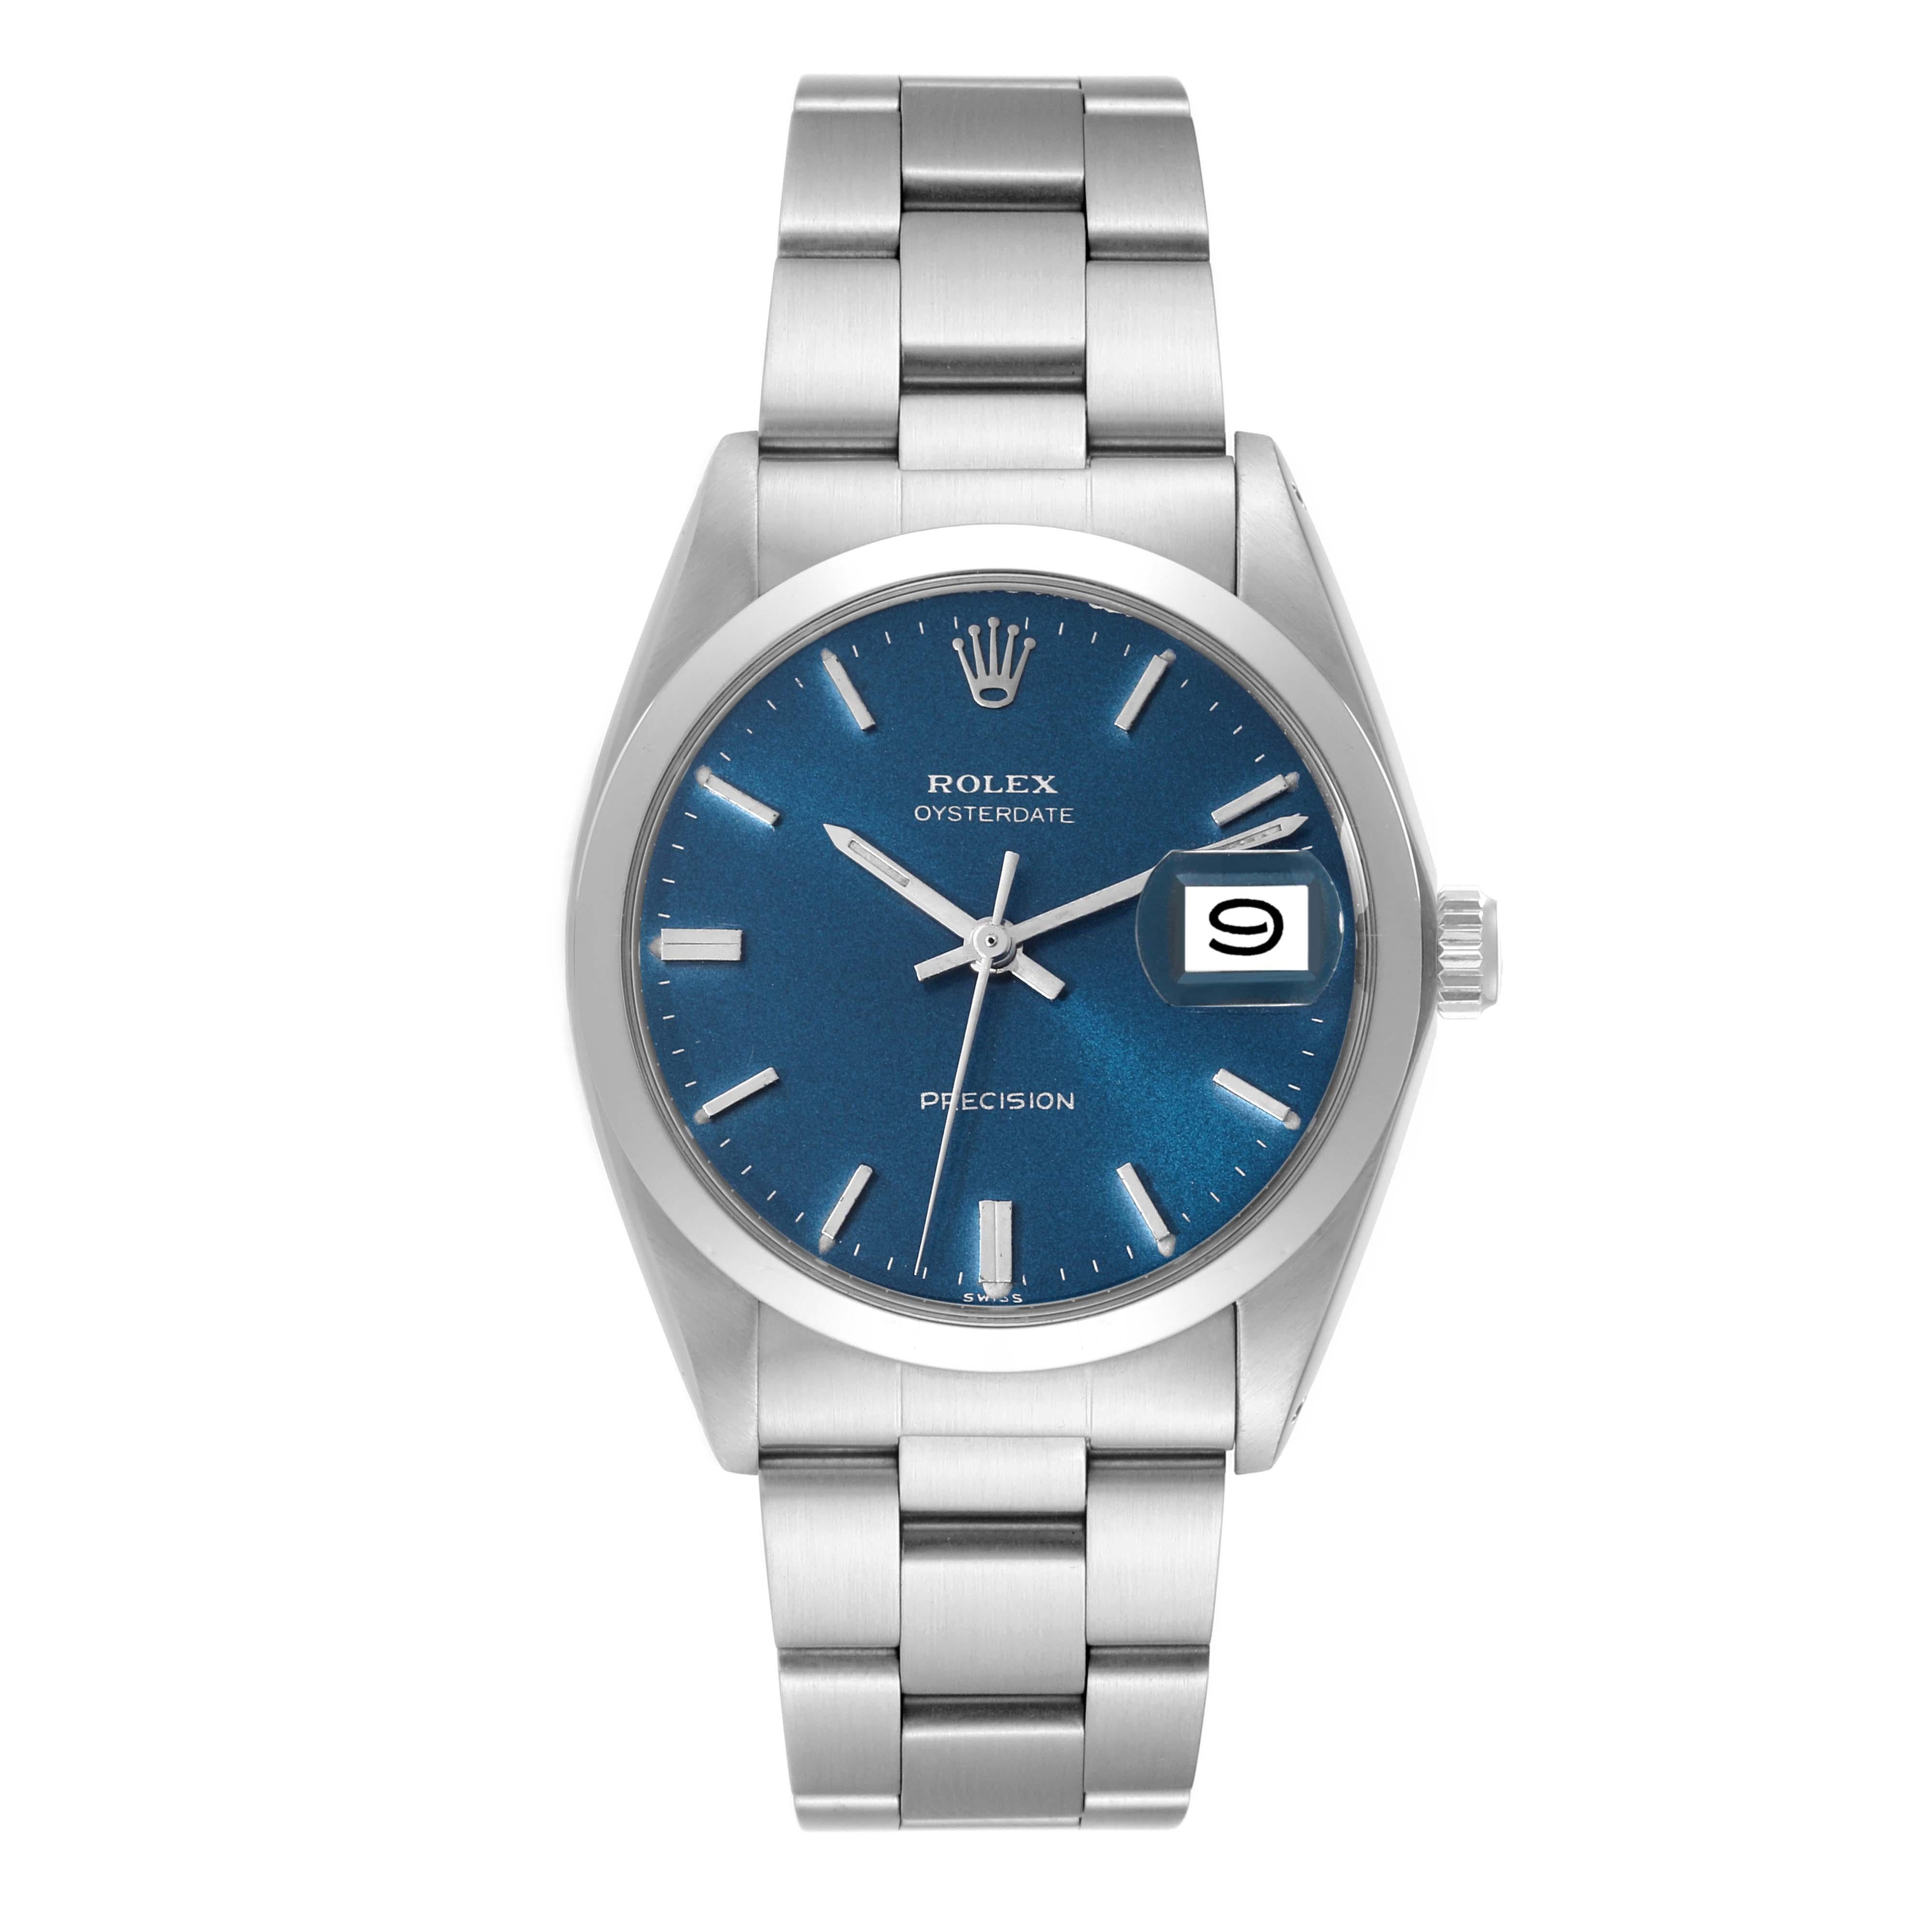 Rolex OysterDate Precision Silver Dial Steel Vintage Mens Watch 6694. Manual-winding movement. Stainless steel oyster case 35.0 mm in diameter. Rolex logo on the crown. Stainless steel smooth bezel. Acrylic crystal with cyclops magnifier. Blue dial